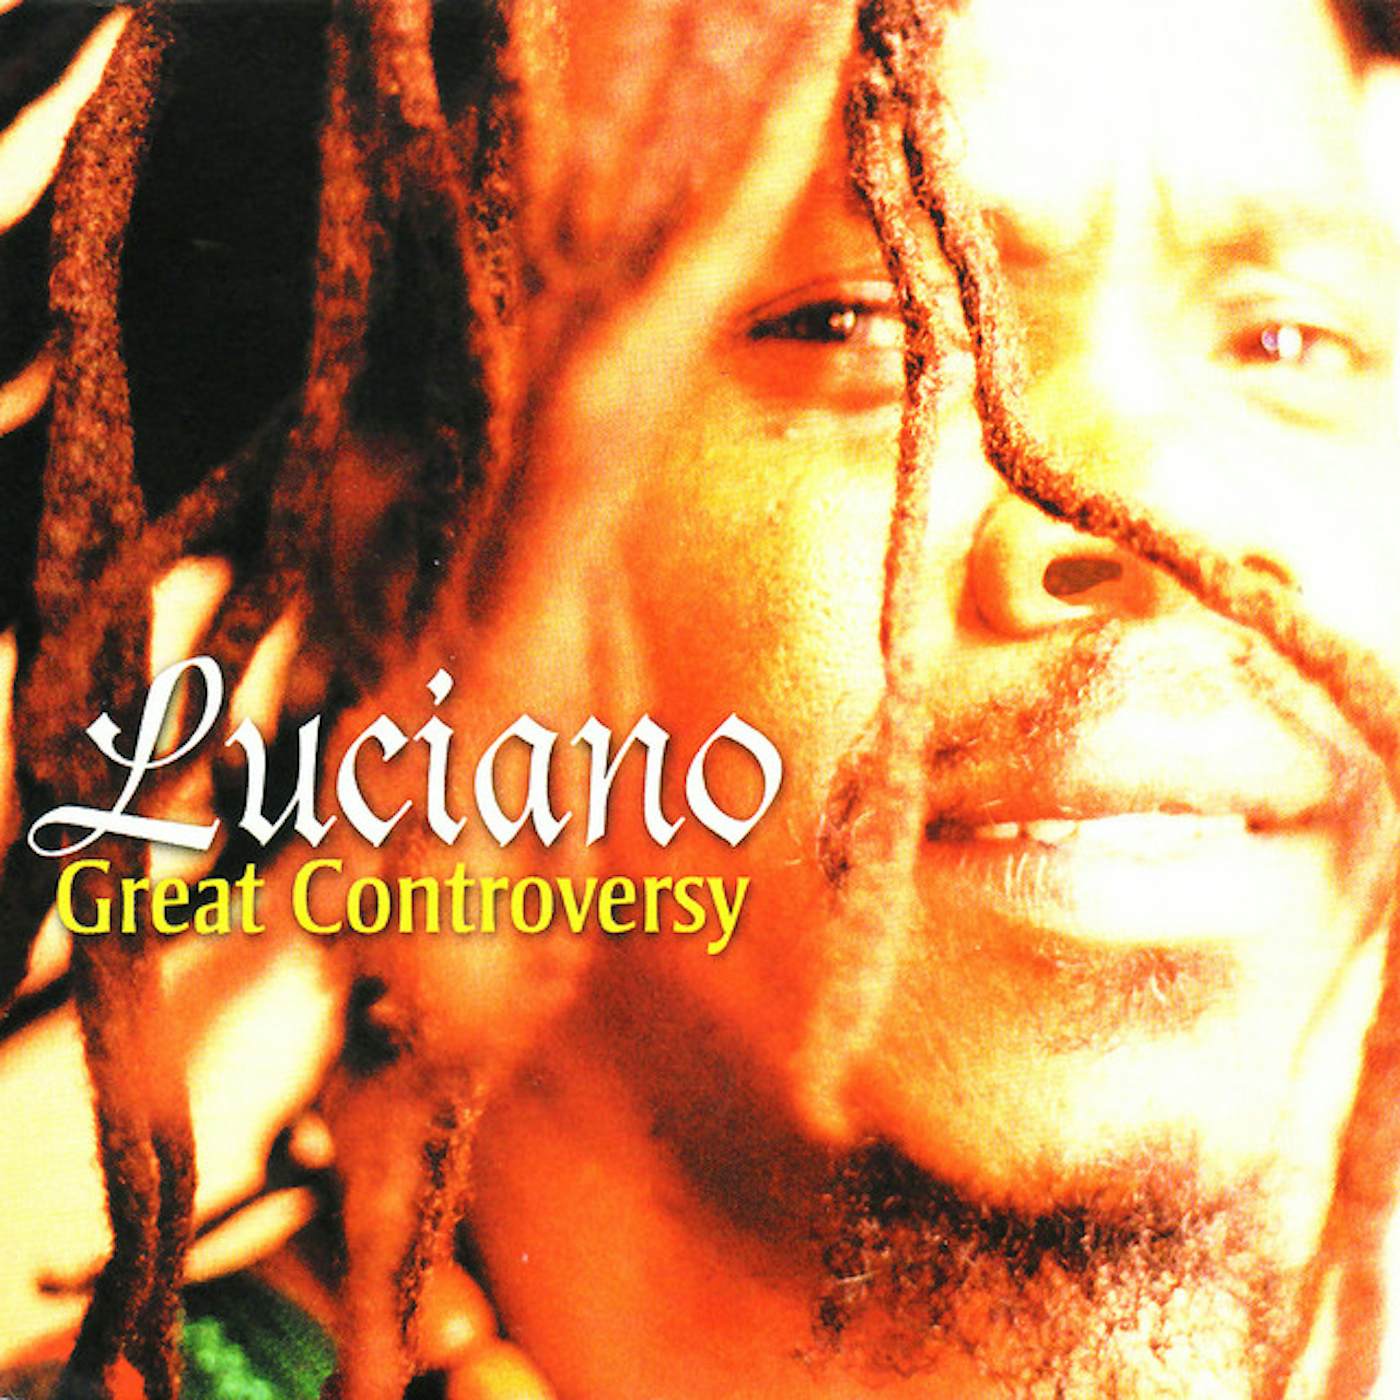 Luciano GREAT CONTROVERSY CD